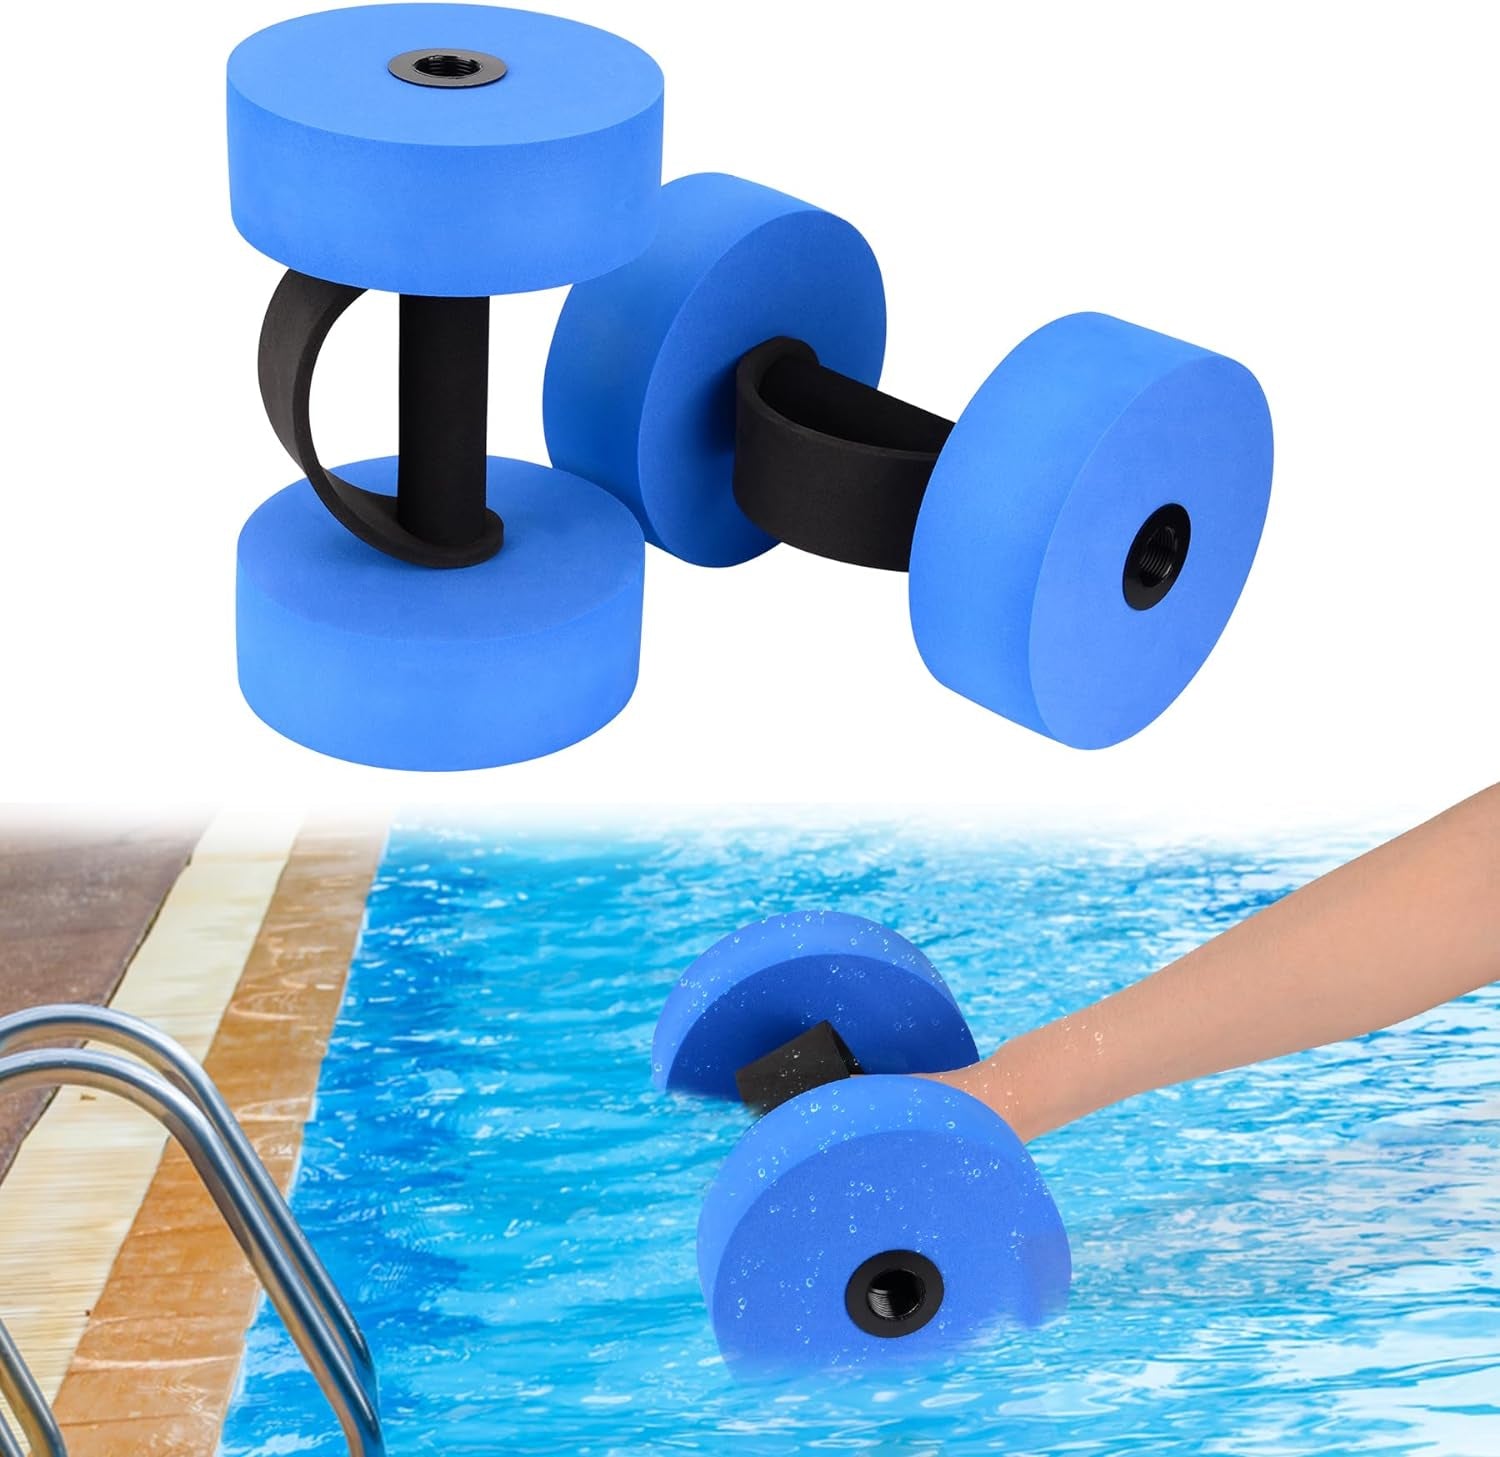 Aquatic Exercise Dumbbells Water Dumbbell Pool Resistance Aquatic Fitness Barbells with 4 High-Density EVA Foam Pool Weights Dumbbells, for Water Aerobics Weight Loss